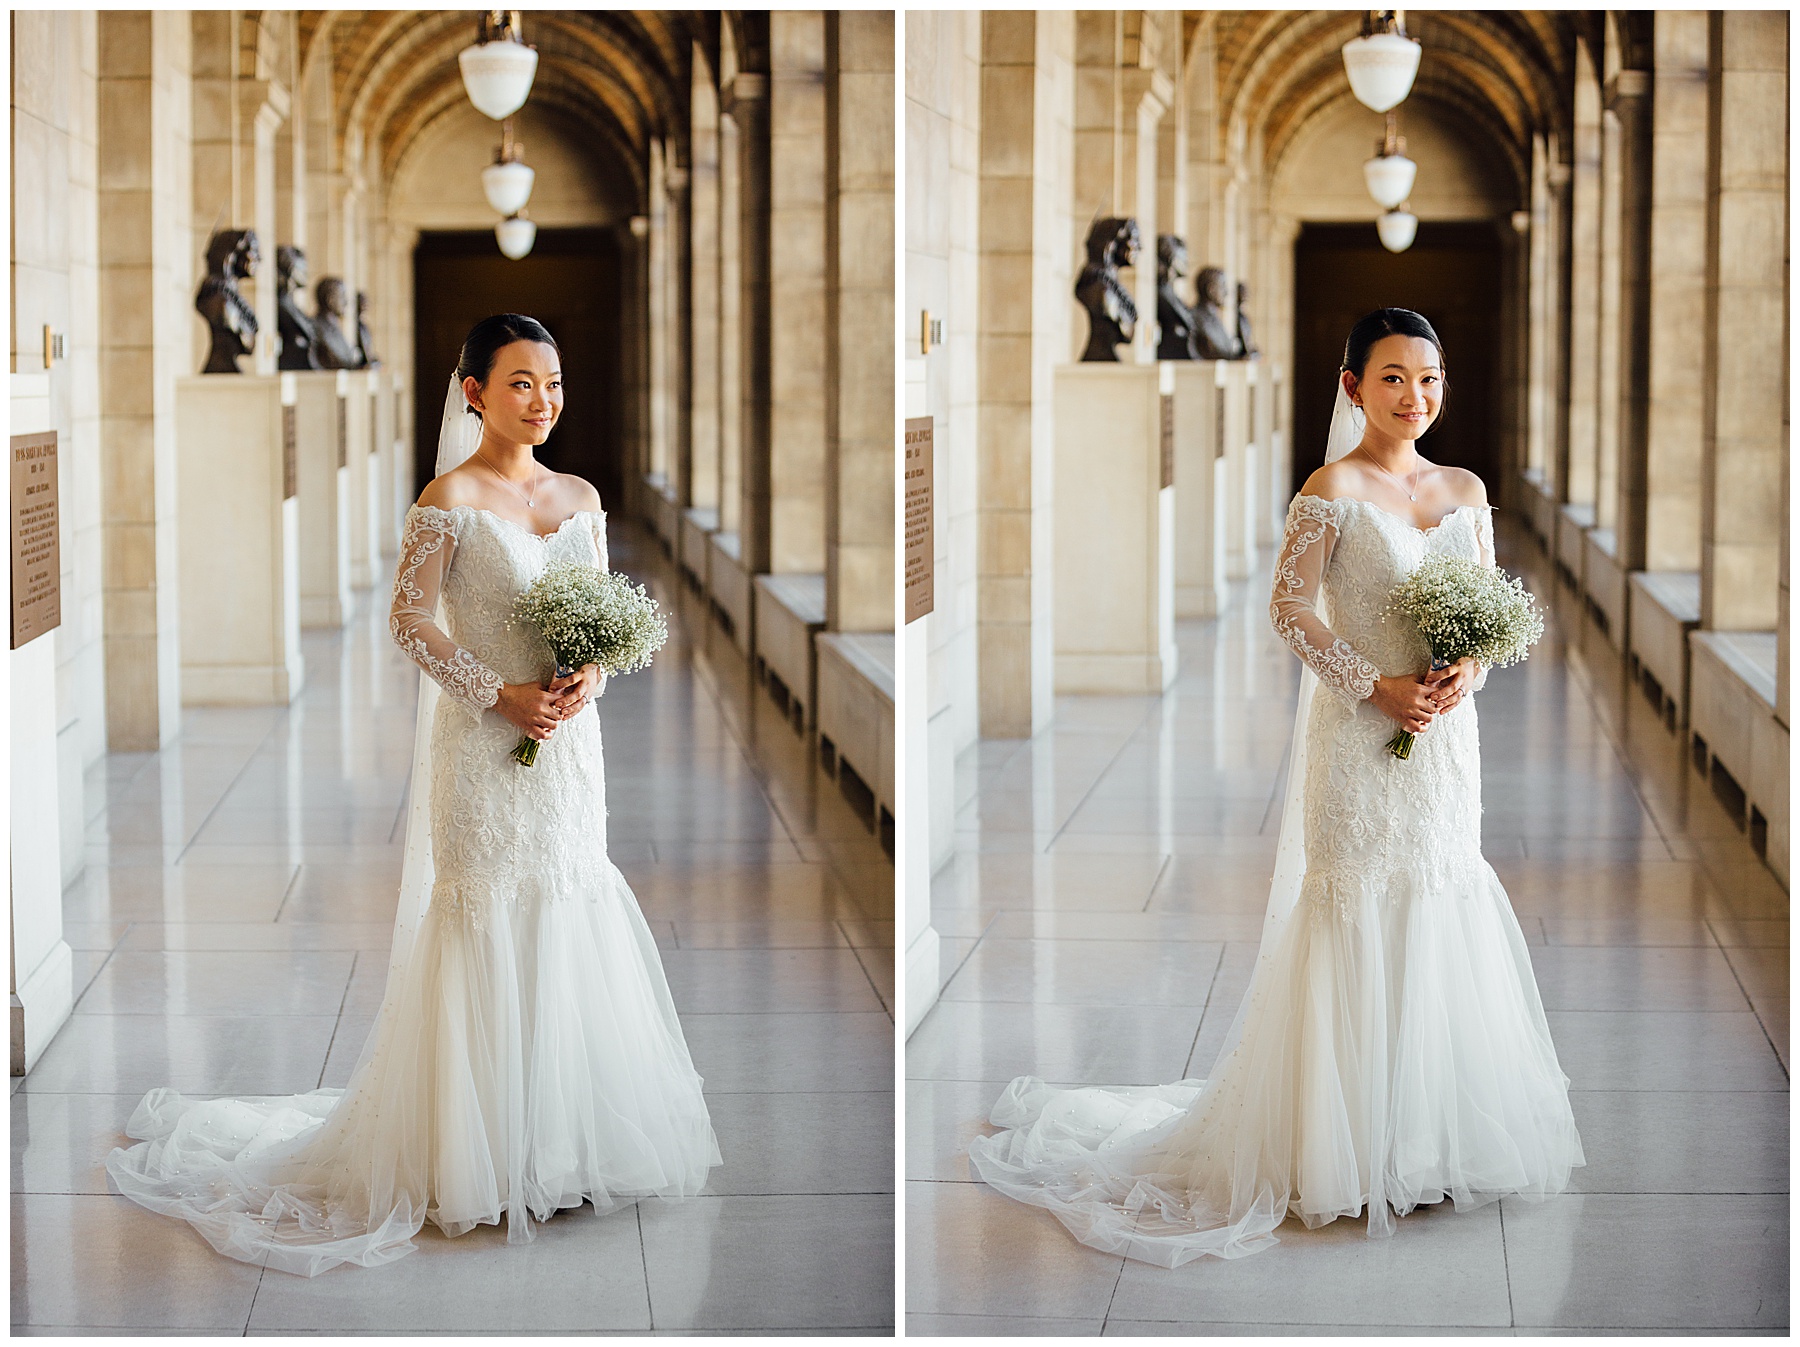 Bridal Portrait in hallway at State Capitol